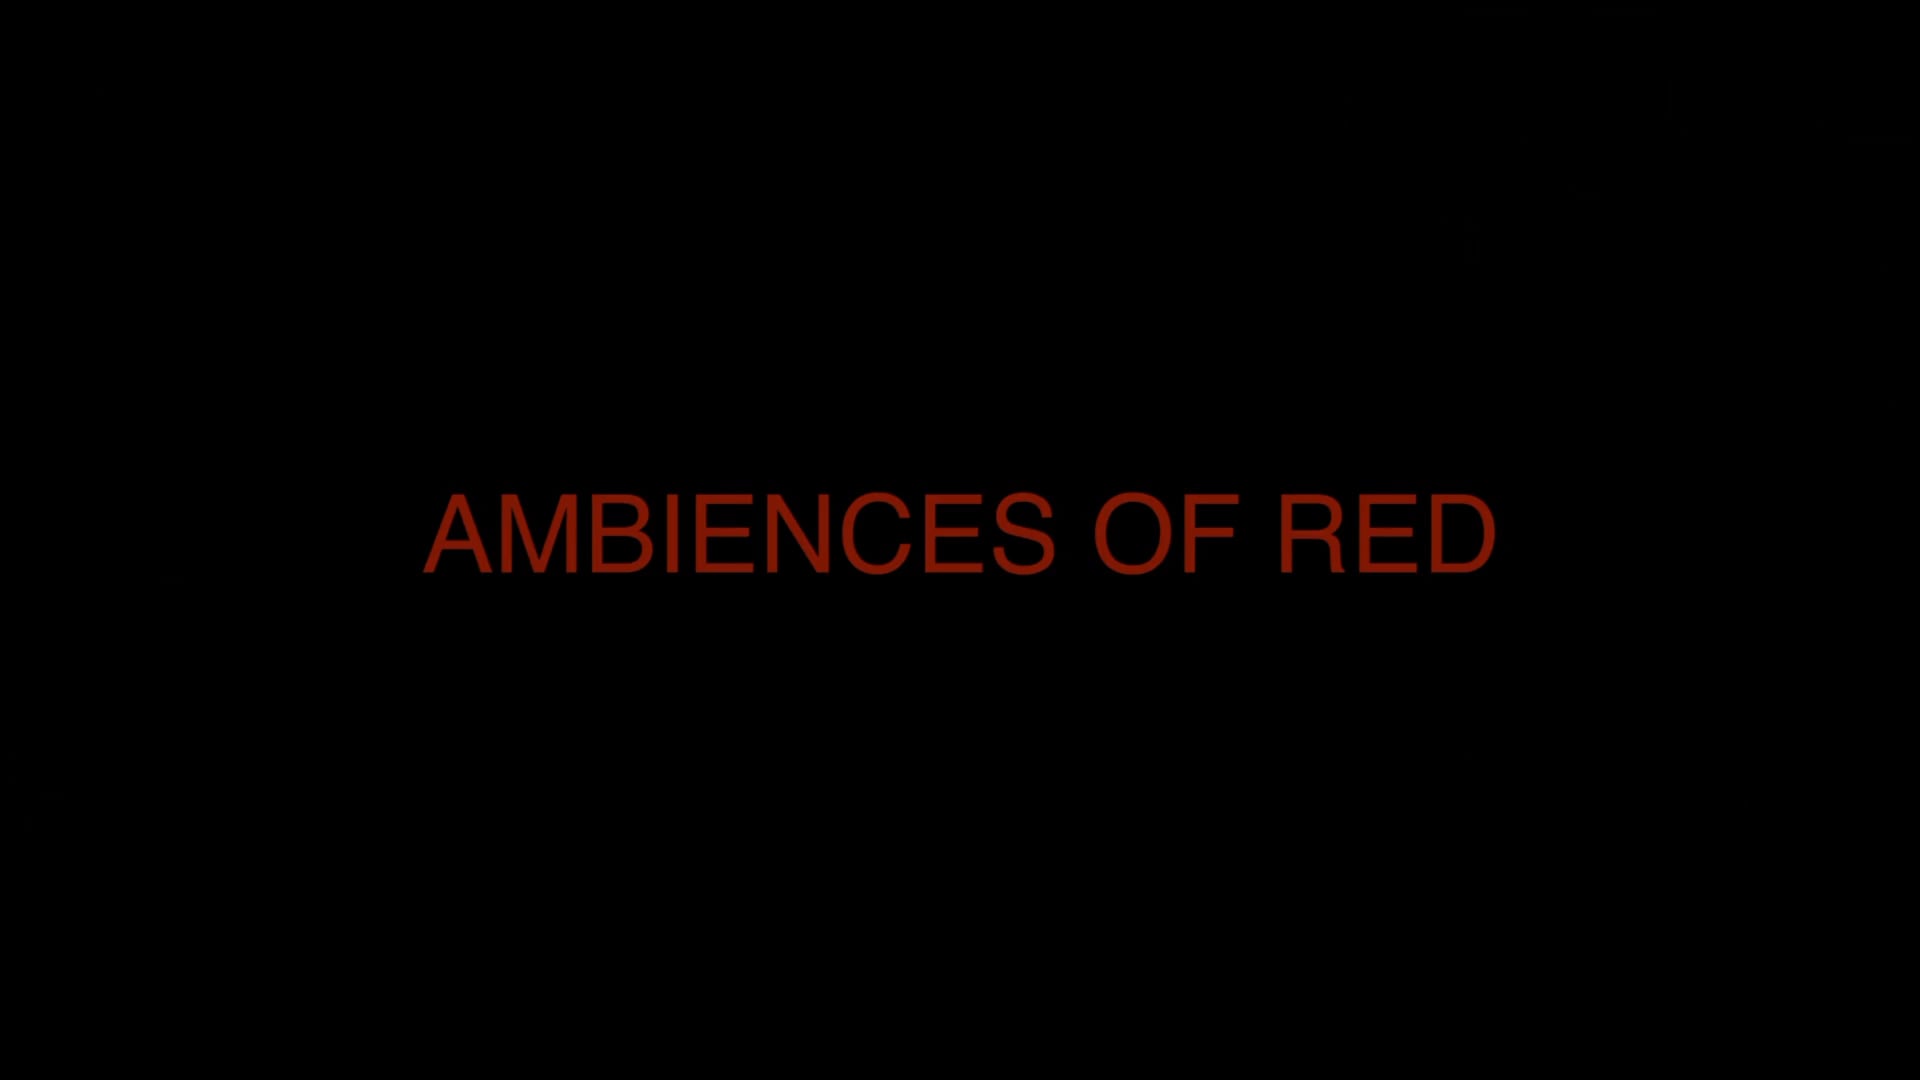 AMBIENCES OF RED